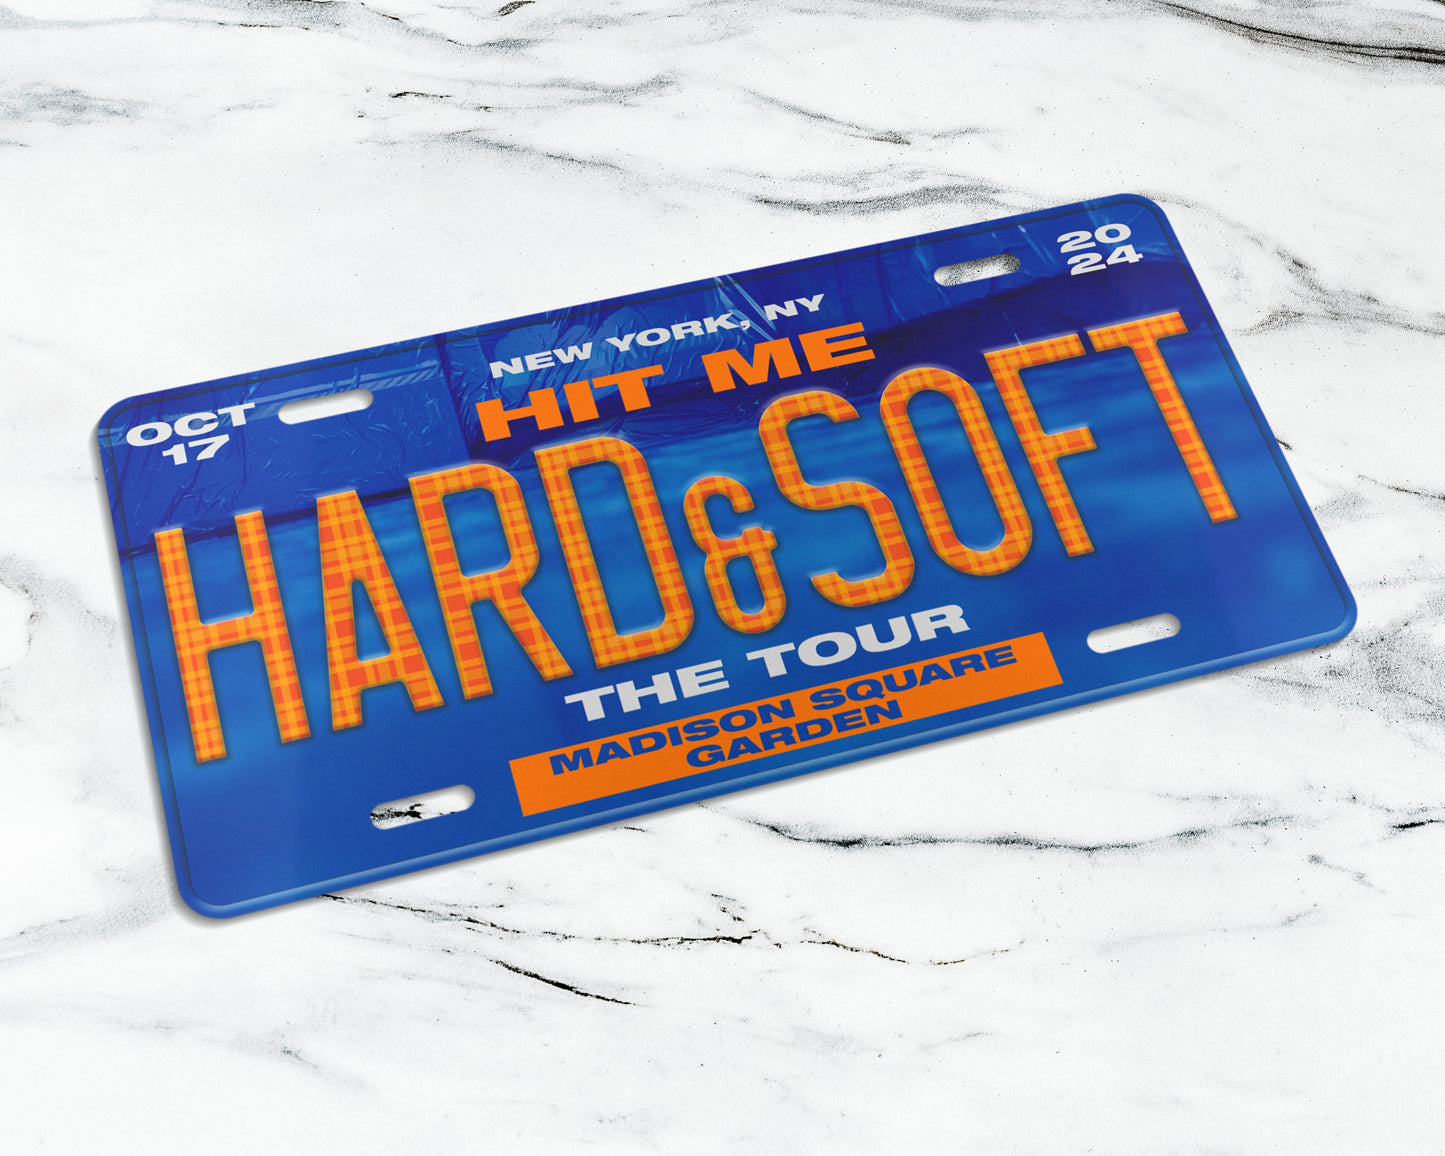 Hit Me Hard and Soft: The Tour license plate